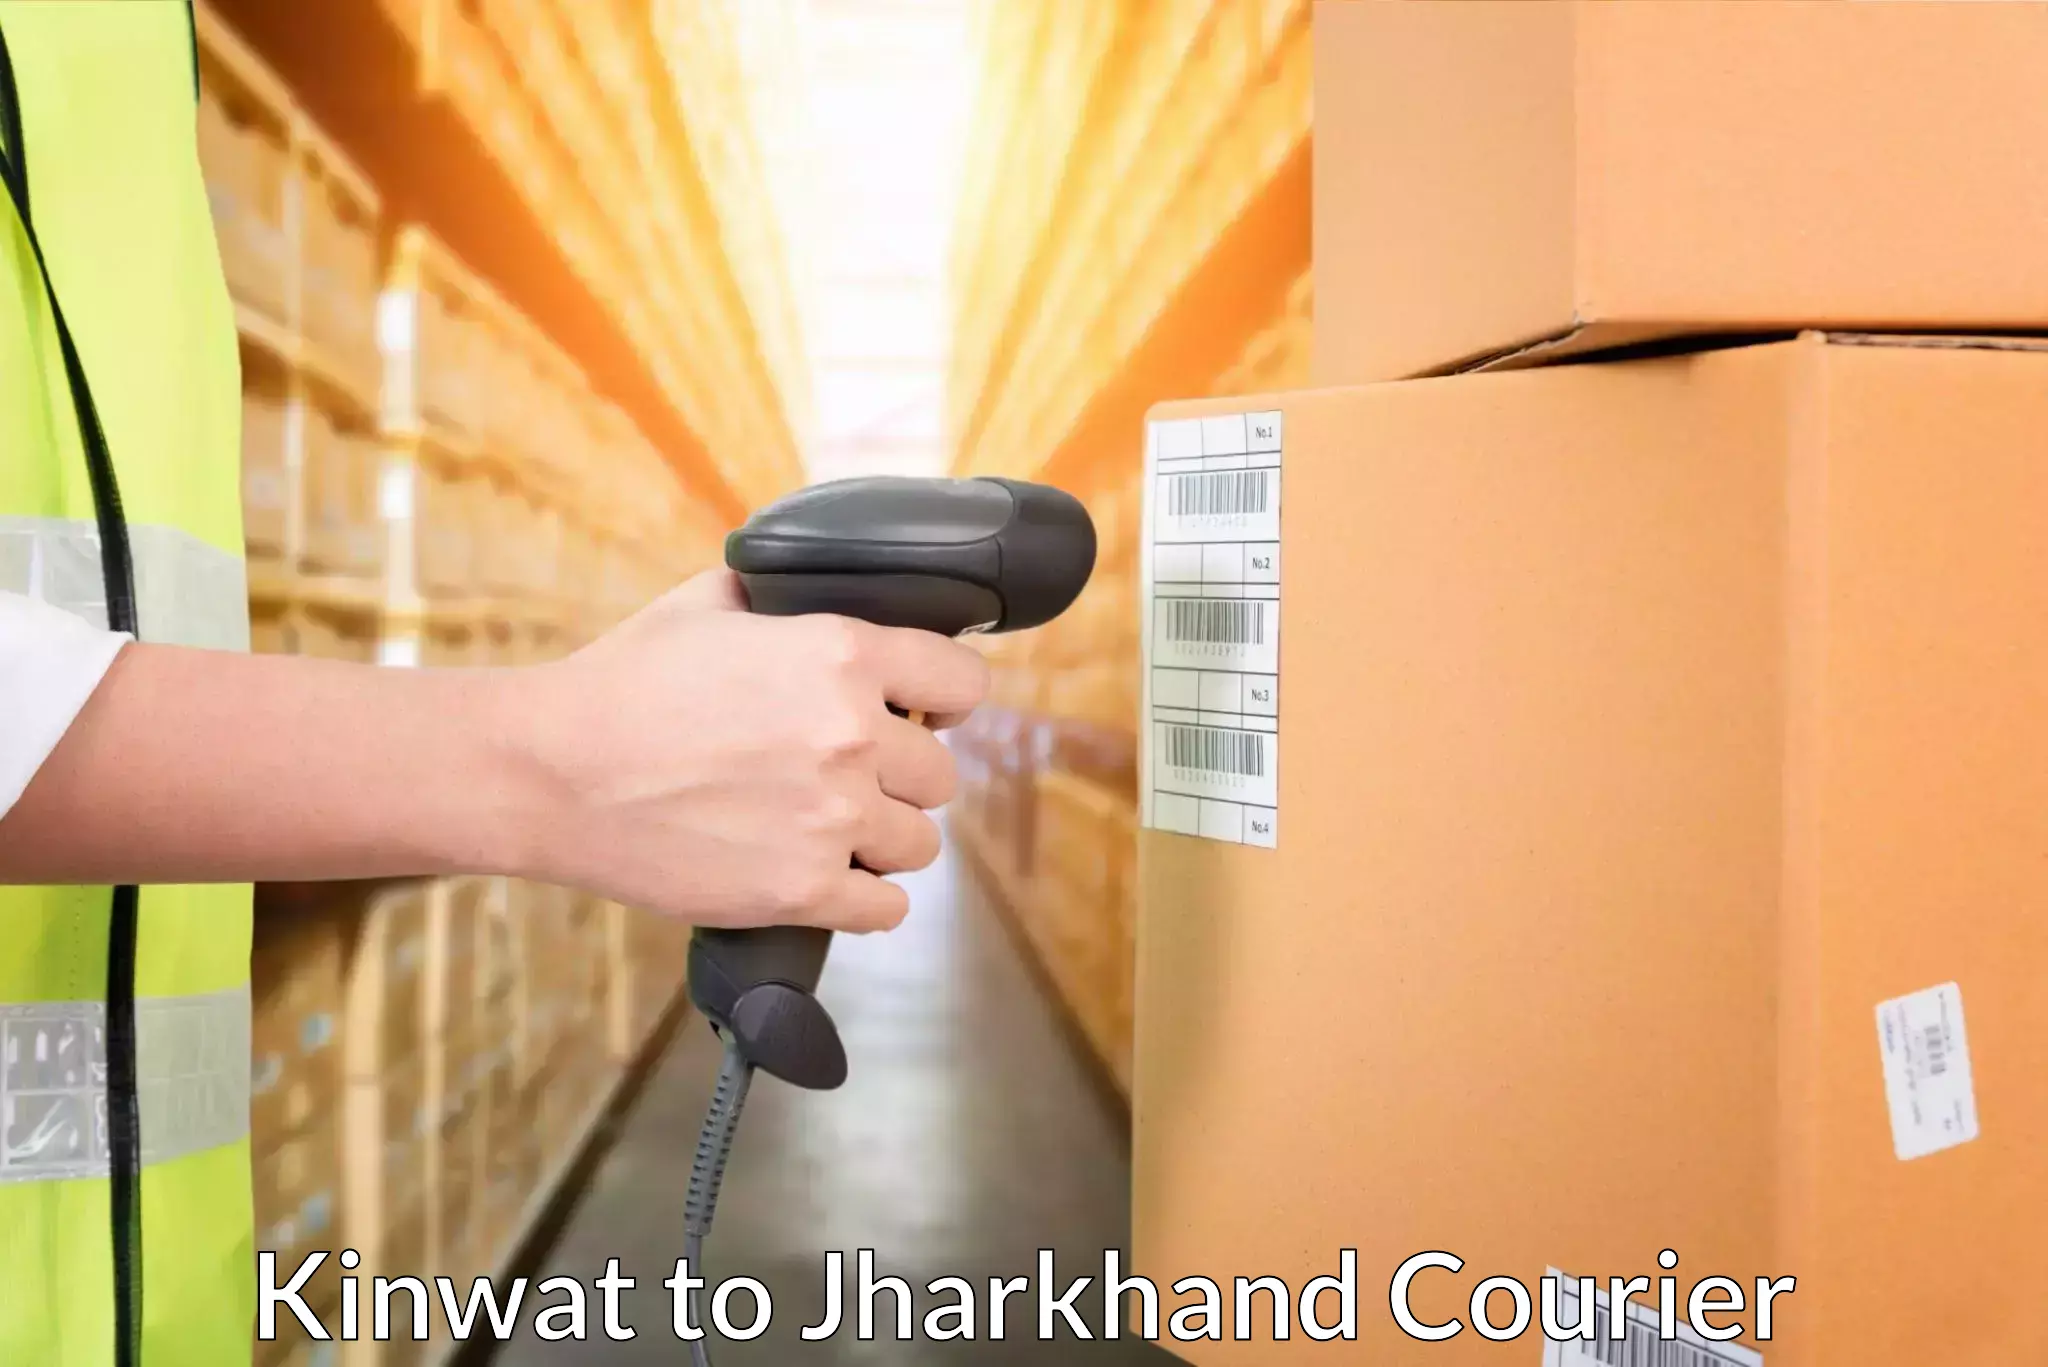 Courier service comparison in Kinwat to Jharkhand